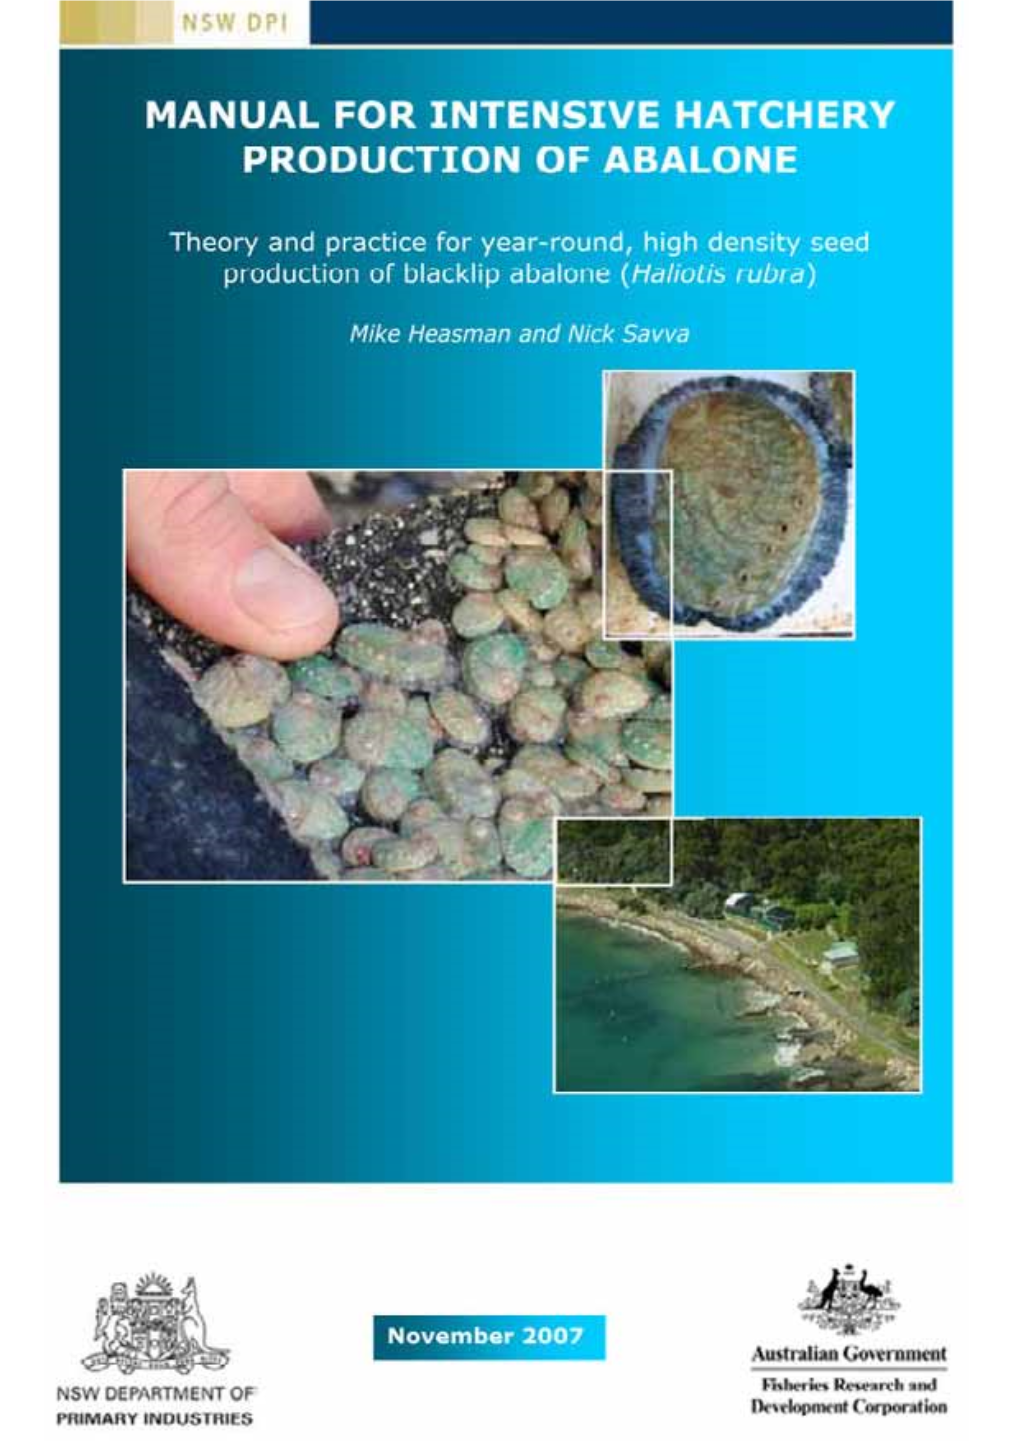 Manual for Intensive Hatchery Production of Abalone